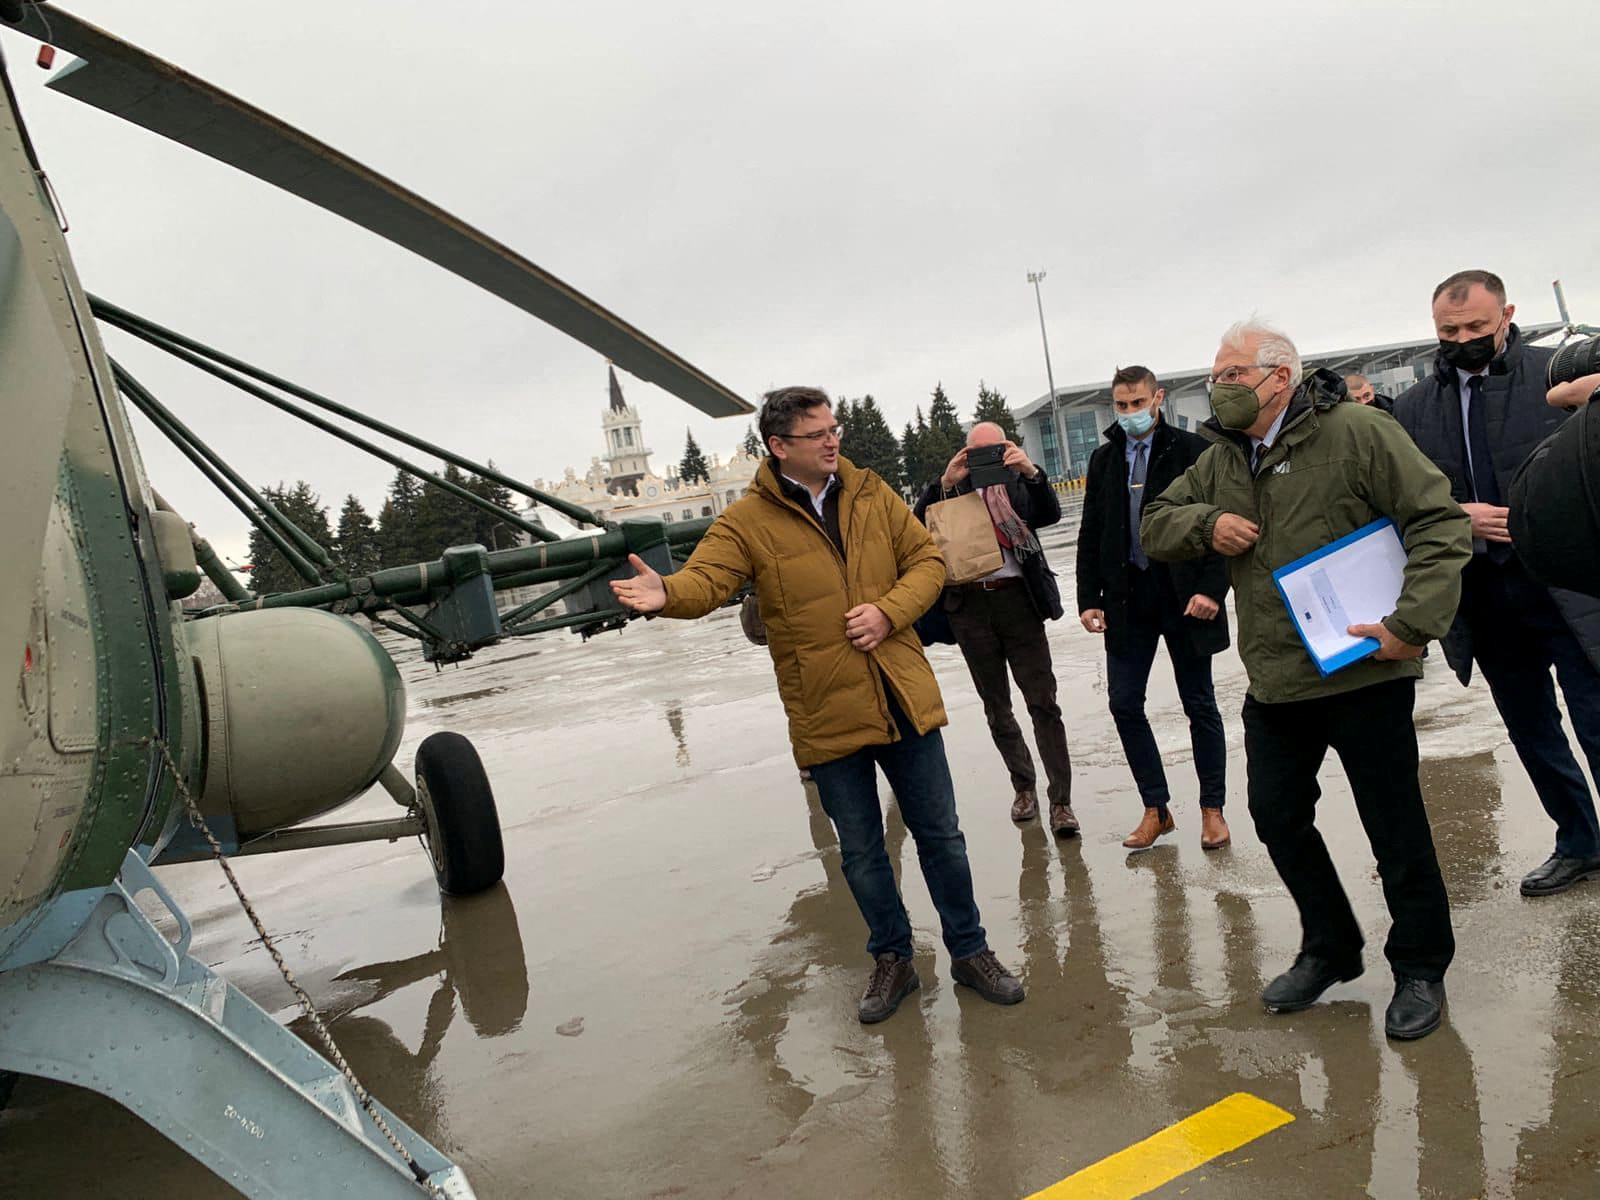 Ukrainian Foreign Minister Dmytro Kuleba and High Representative of the European Union for Foreign Affairs Josep Borrell board a helicopter to depart to eastern Luhansk region, at the airport in Kharkiv, Ukraine January 5, 2022.  Ukrainian Foreign Ministry/Handout via REUTERS